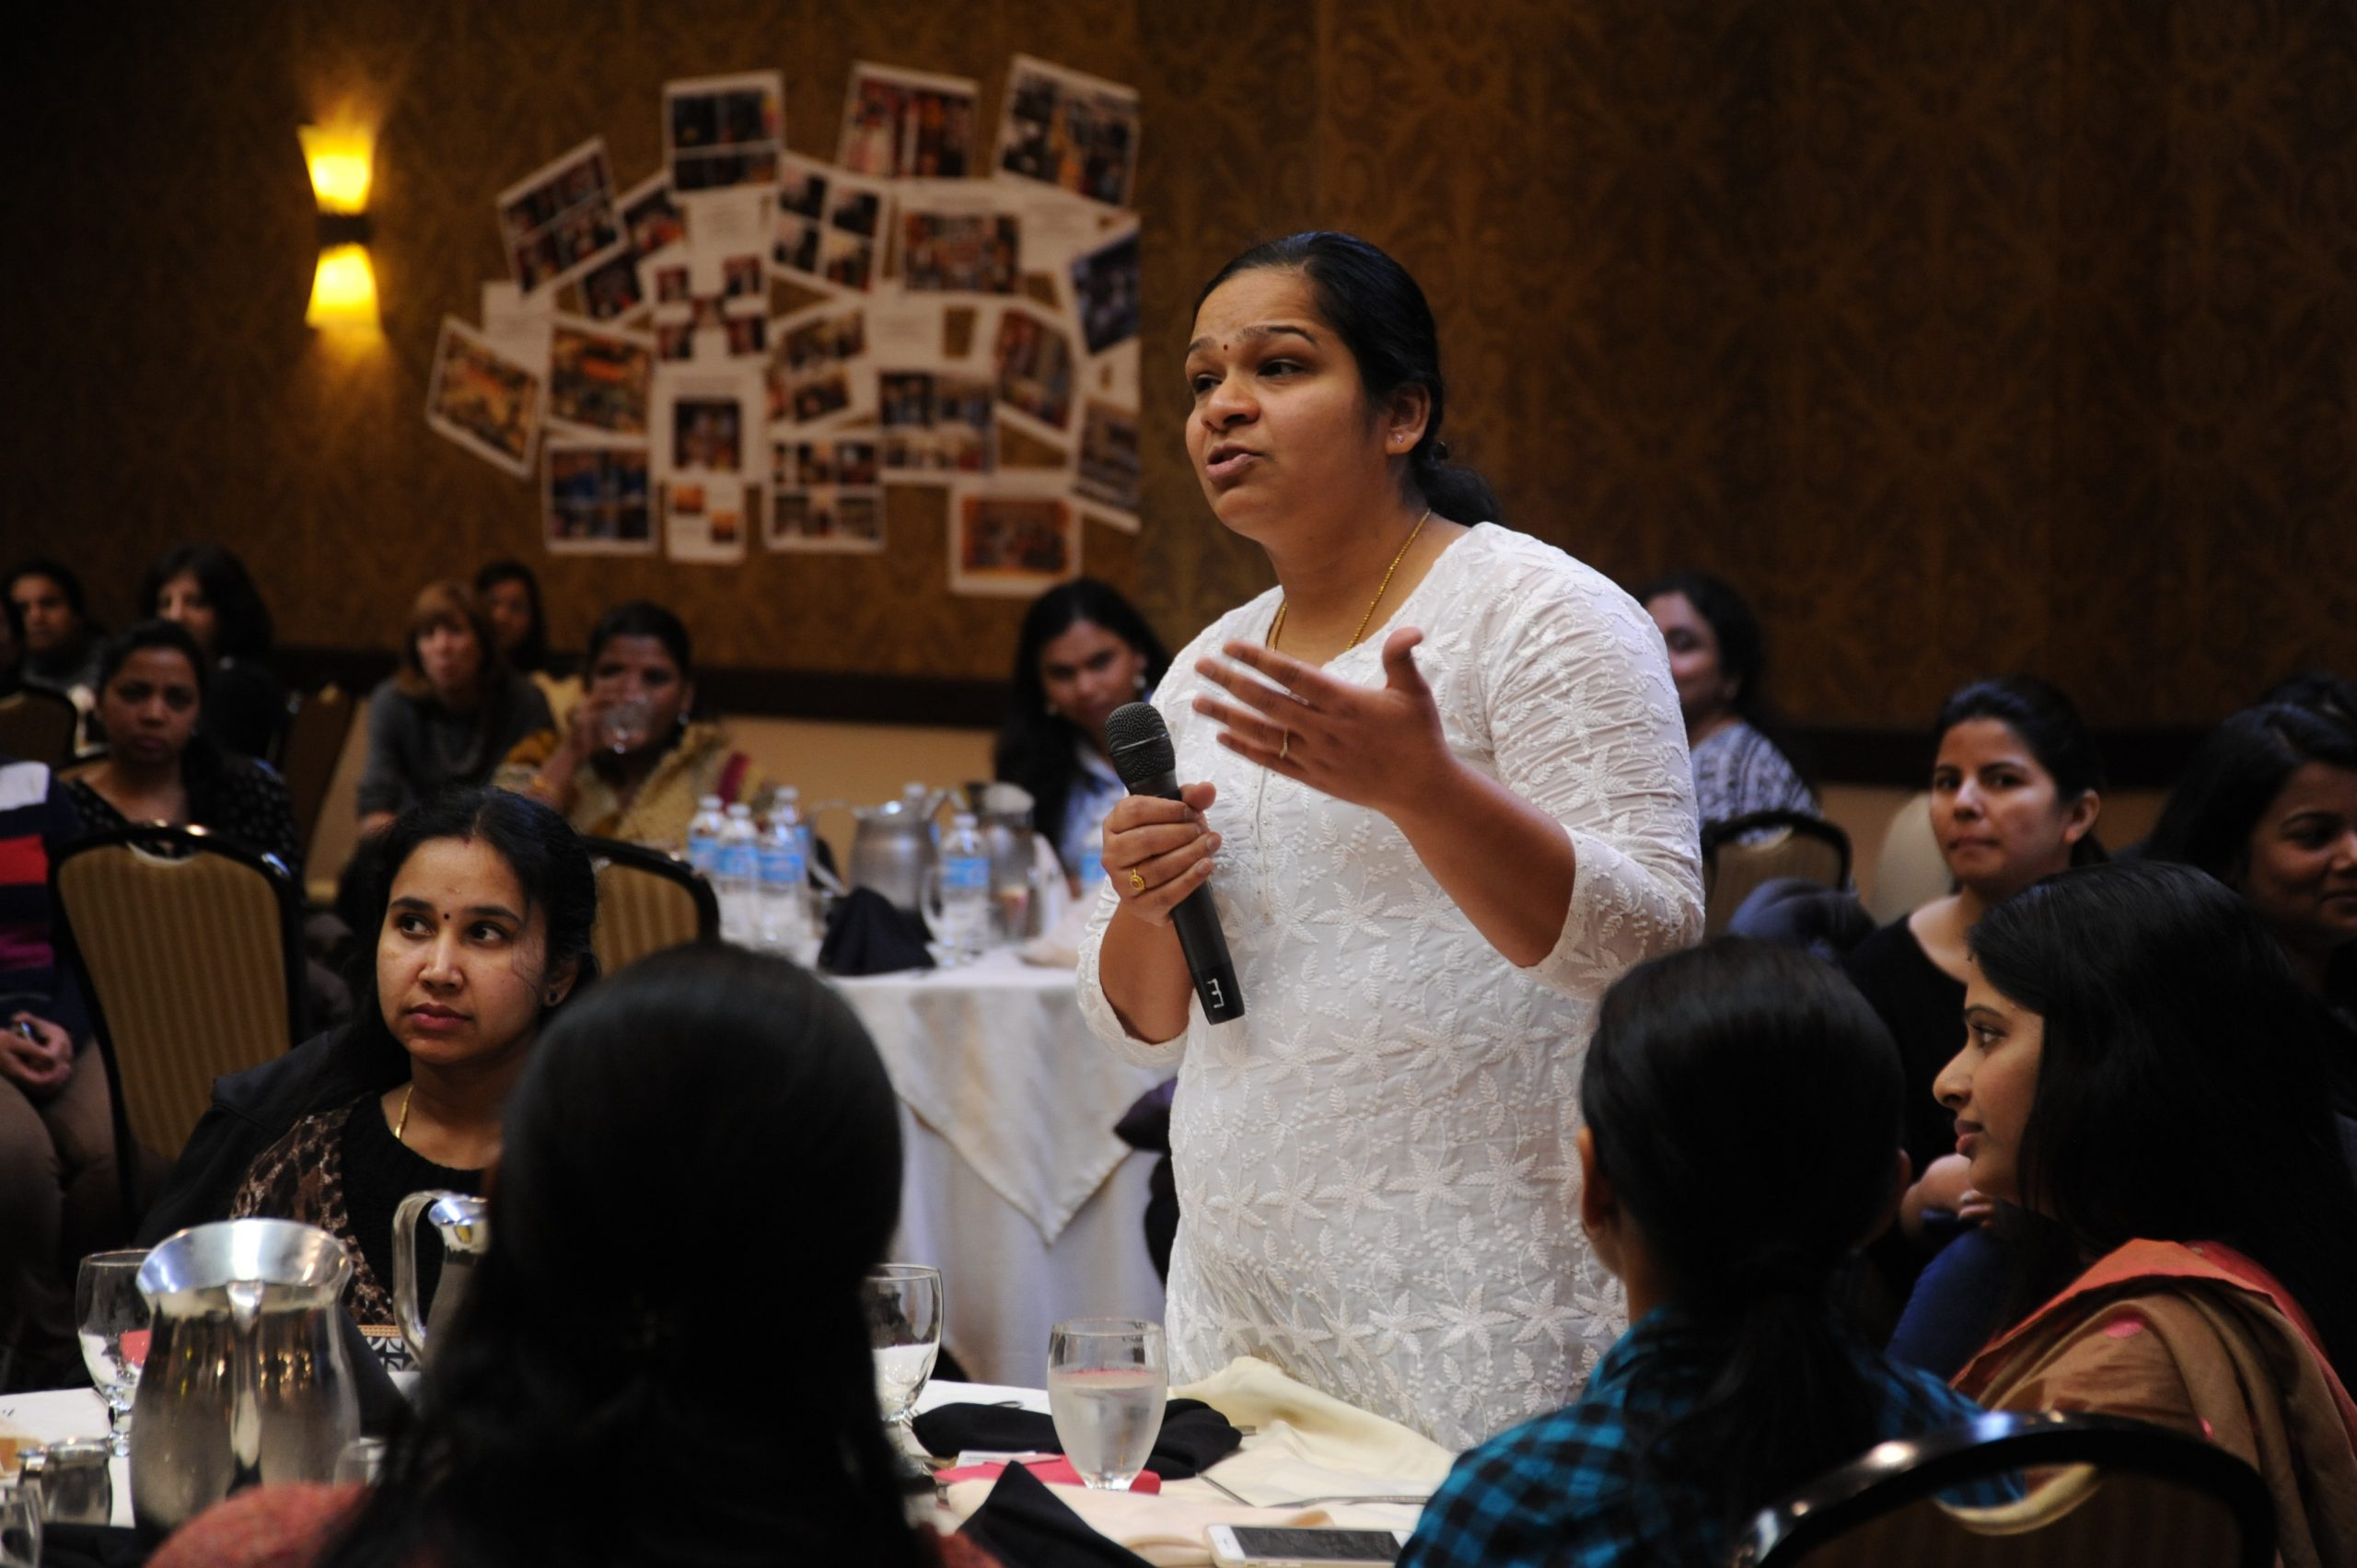 a South Asian woman standing and speaking into a microphone to an audience seated at dining tables